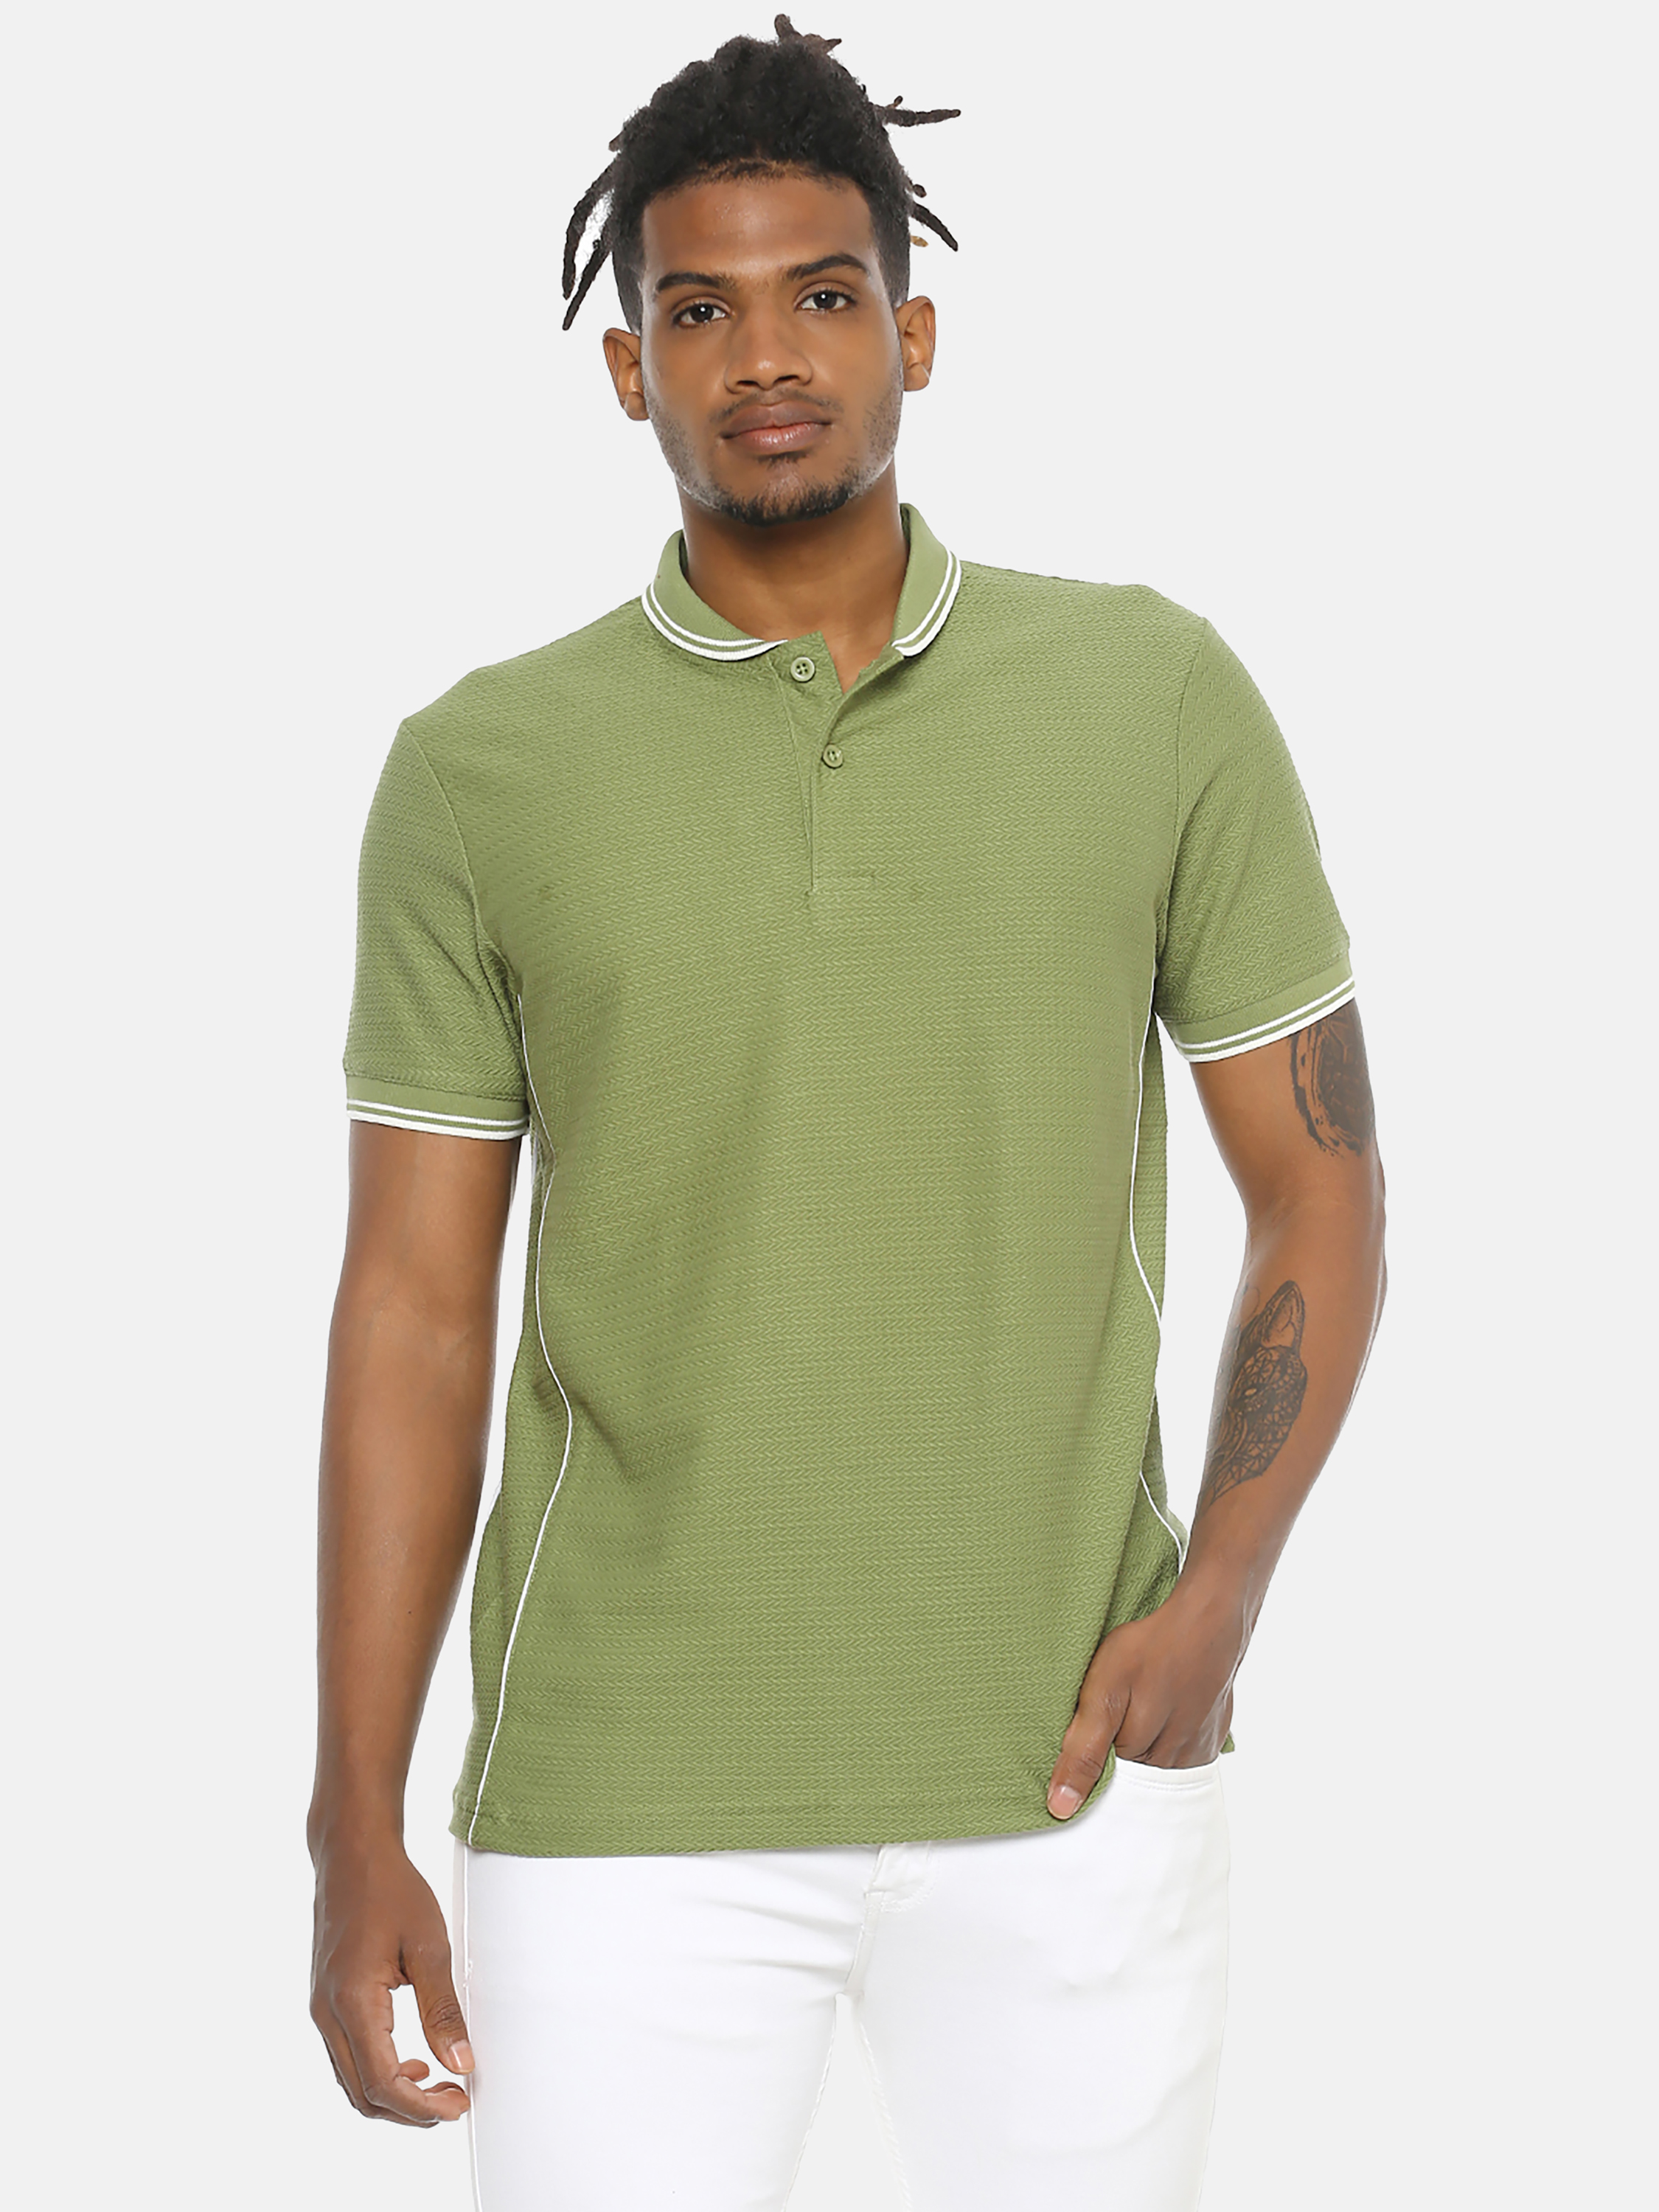 Campus Sutra Men Green Color Stylish Casual Polo T-shirts